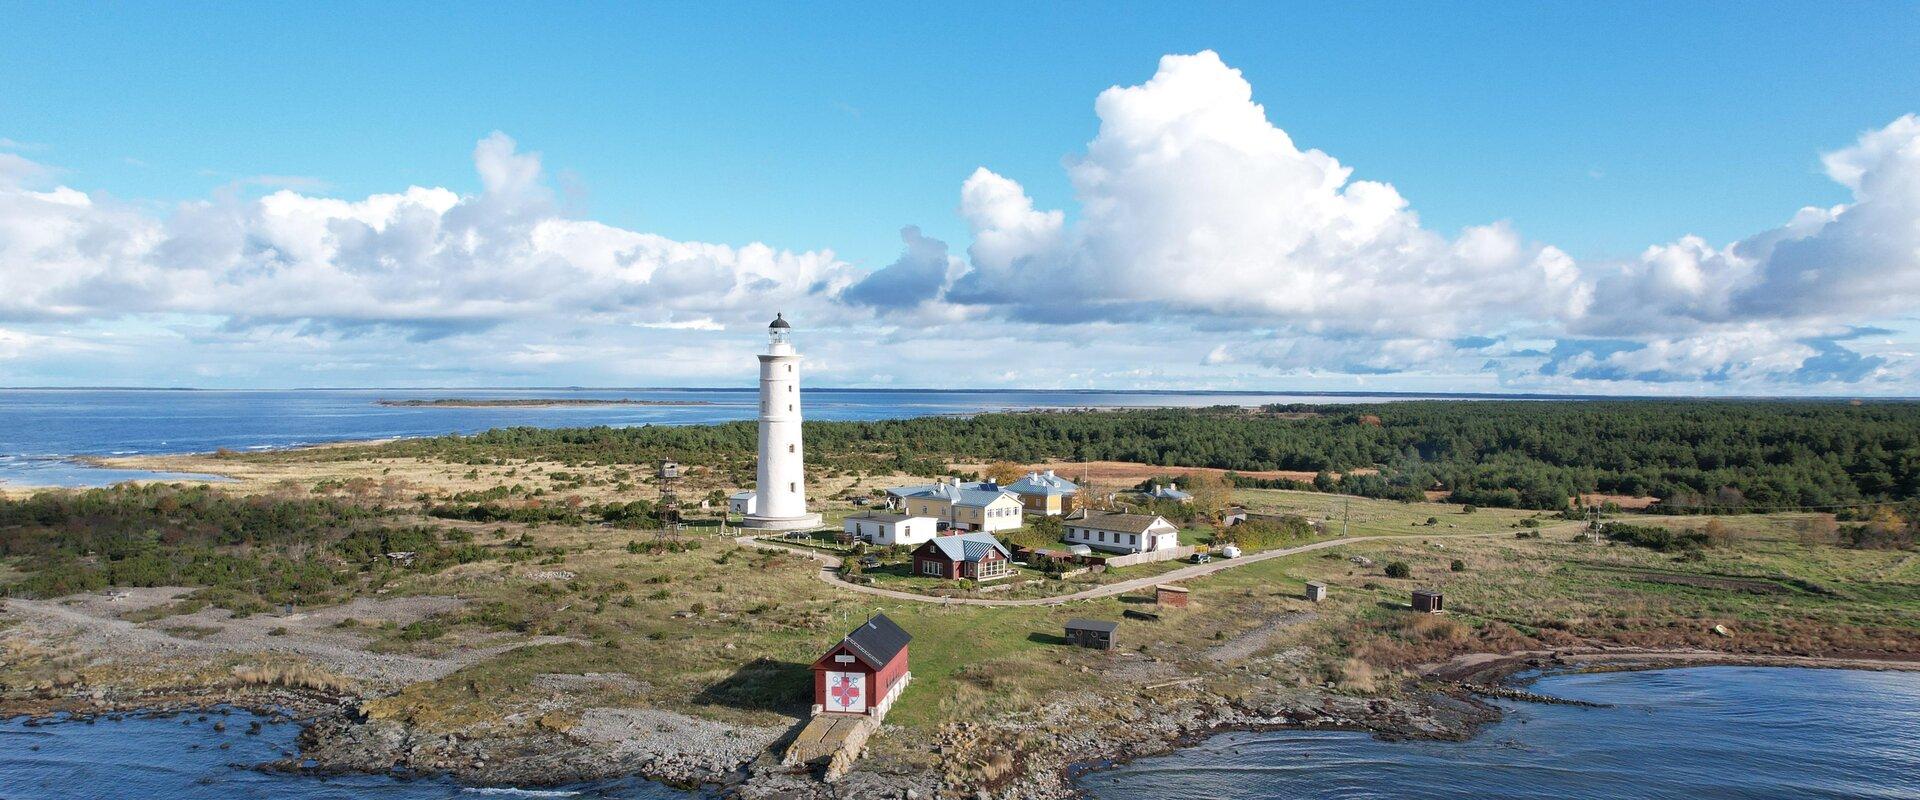 When visiting Vilsandi Island, you should definitely make your way to the lighthouse. After just 160 steps up the stairs, youll be treated to stunning